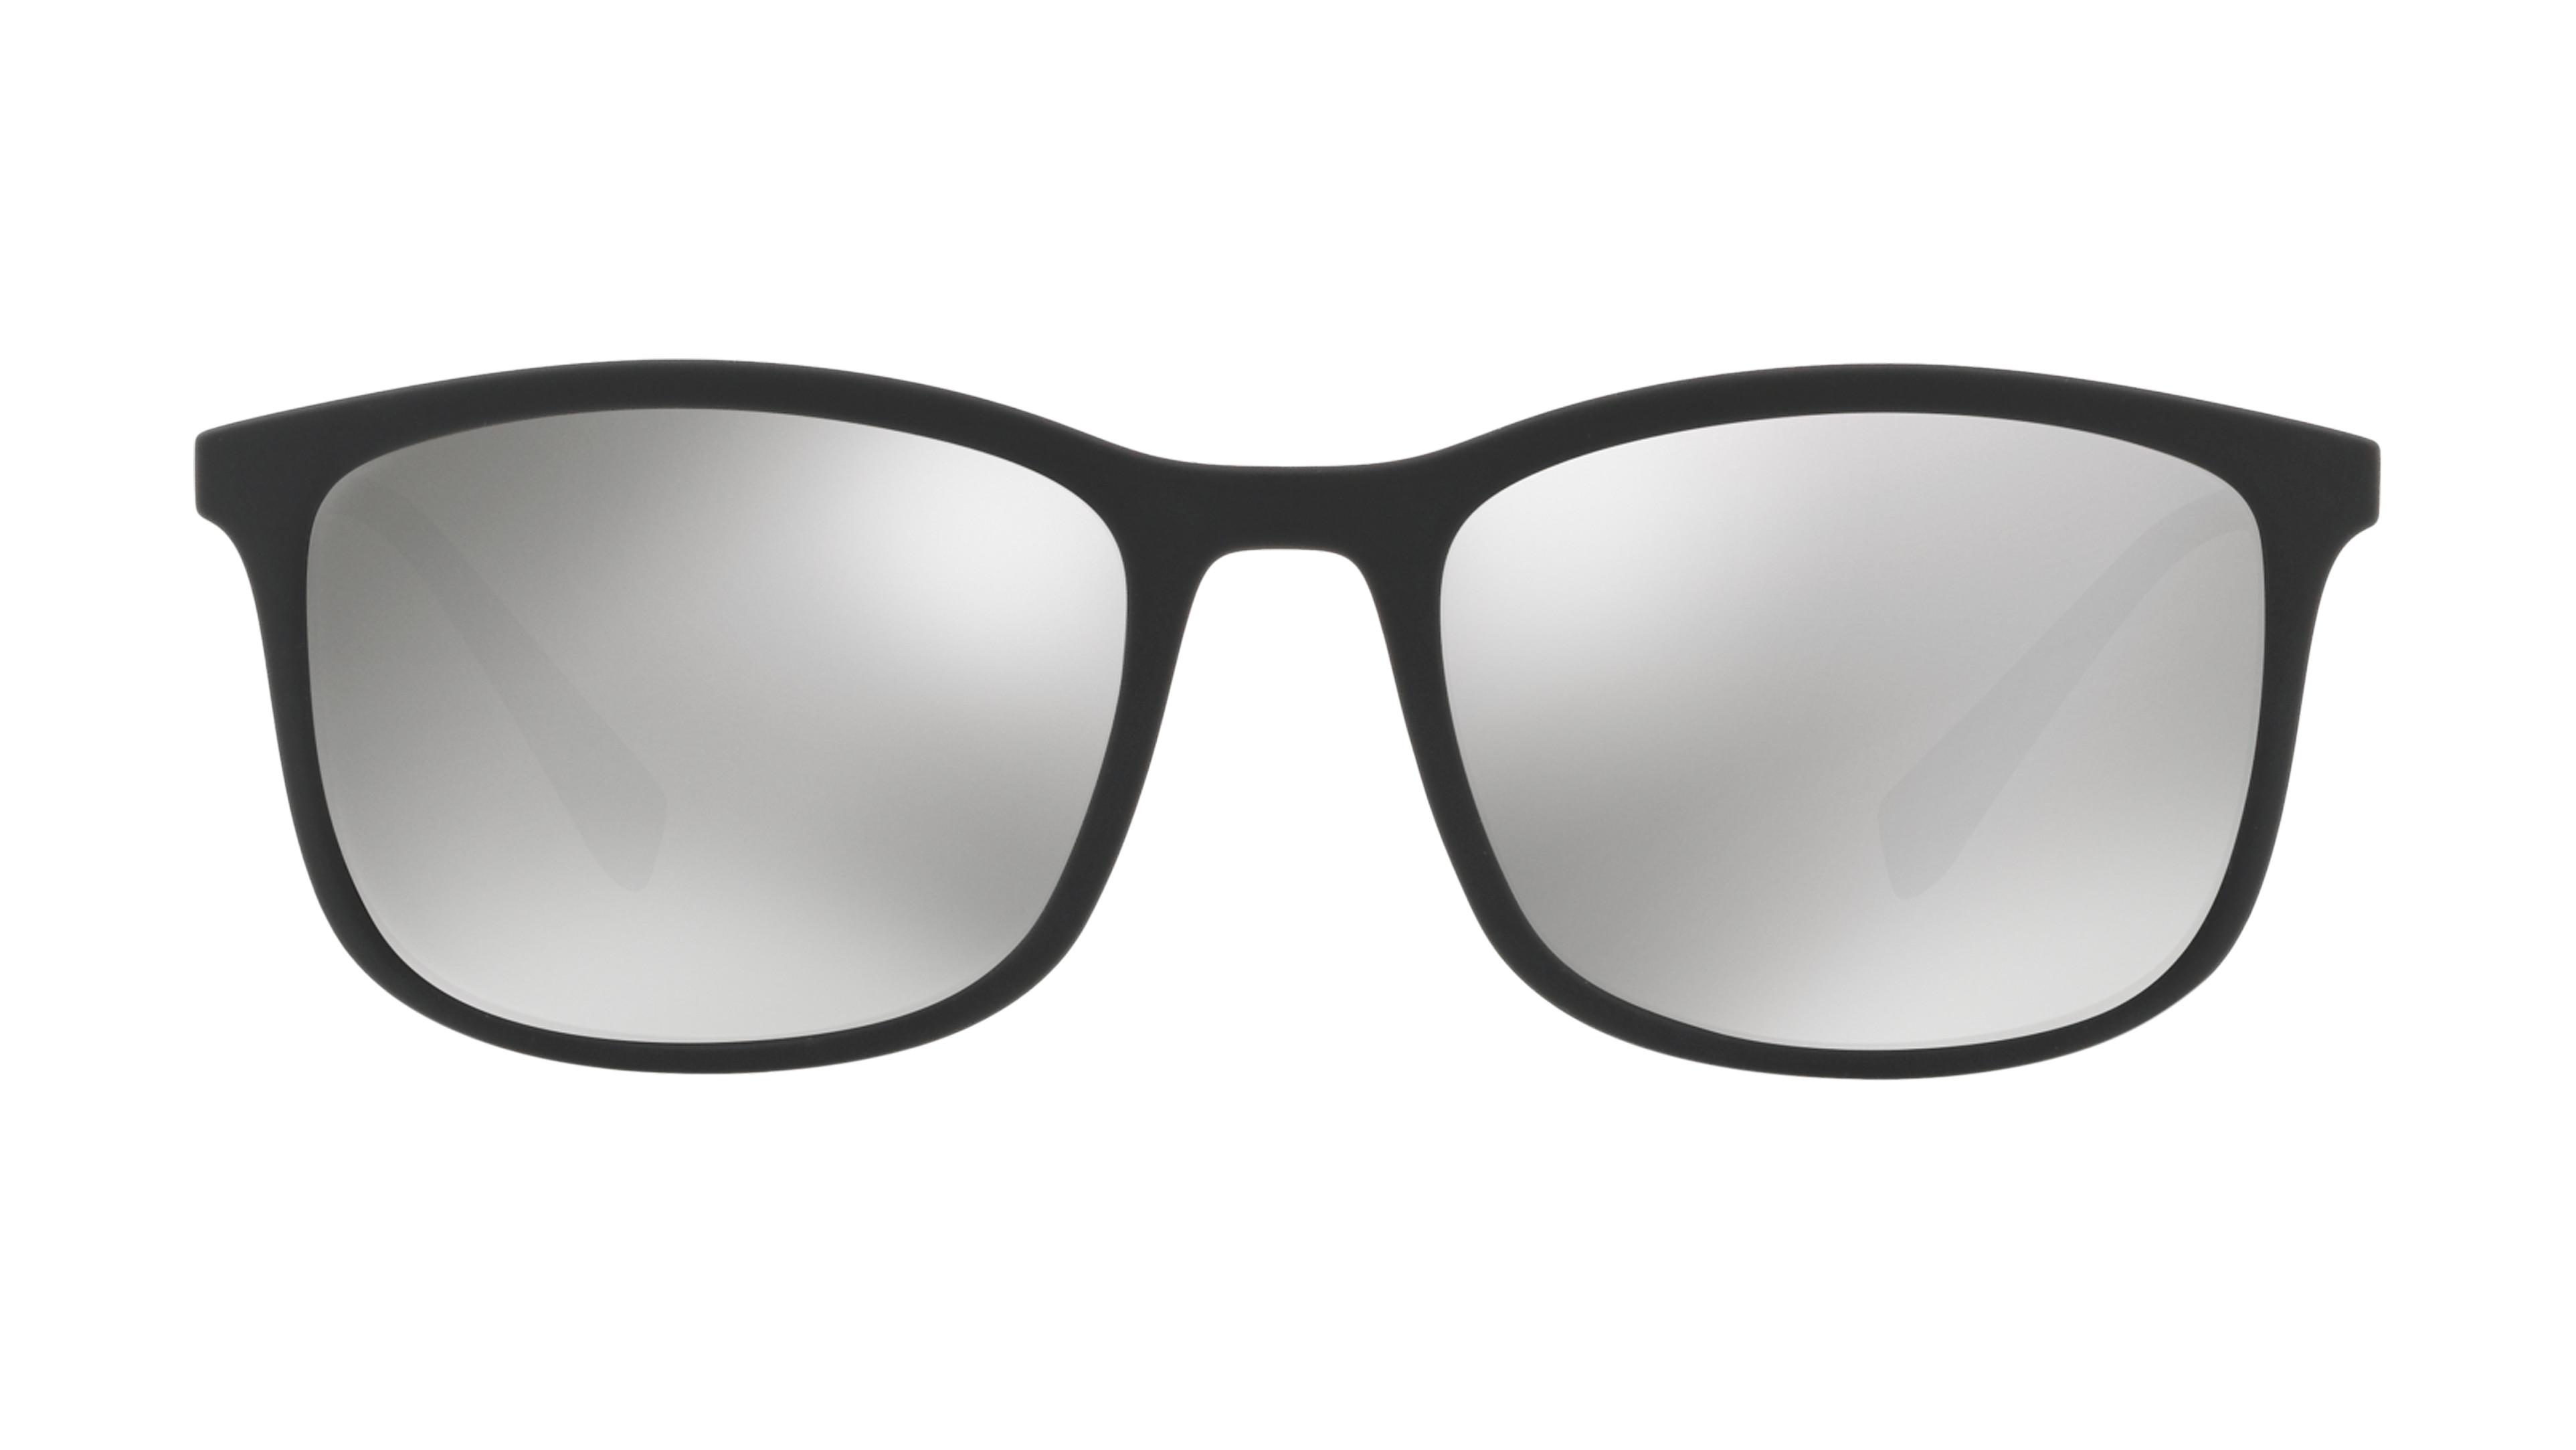 [products.image.front] Prada Linea Rossa LIFESTYLE 0PS 01TS DG02B0 Sonnenbrille